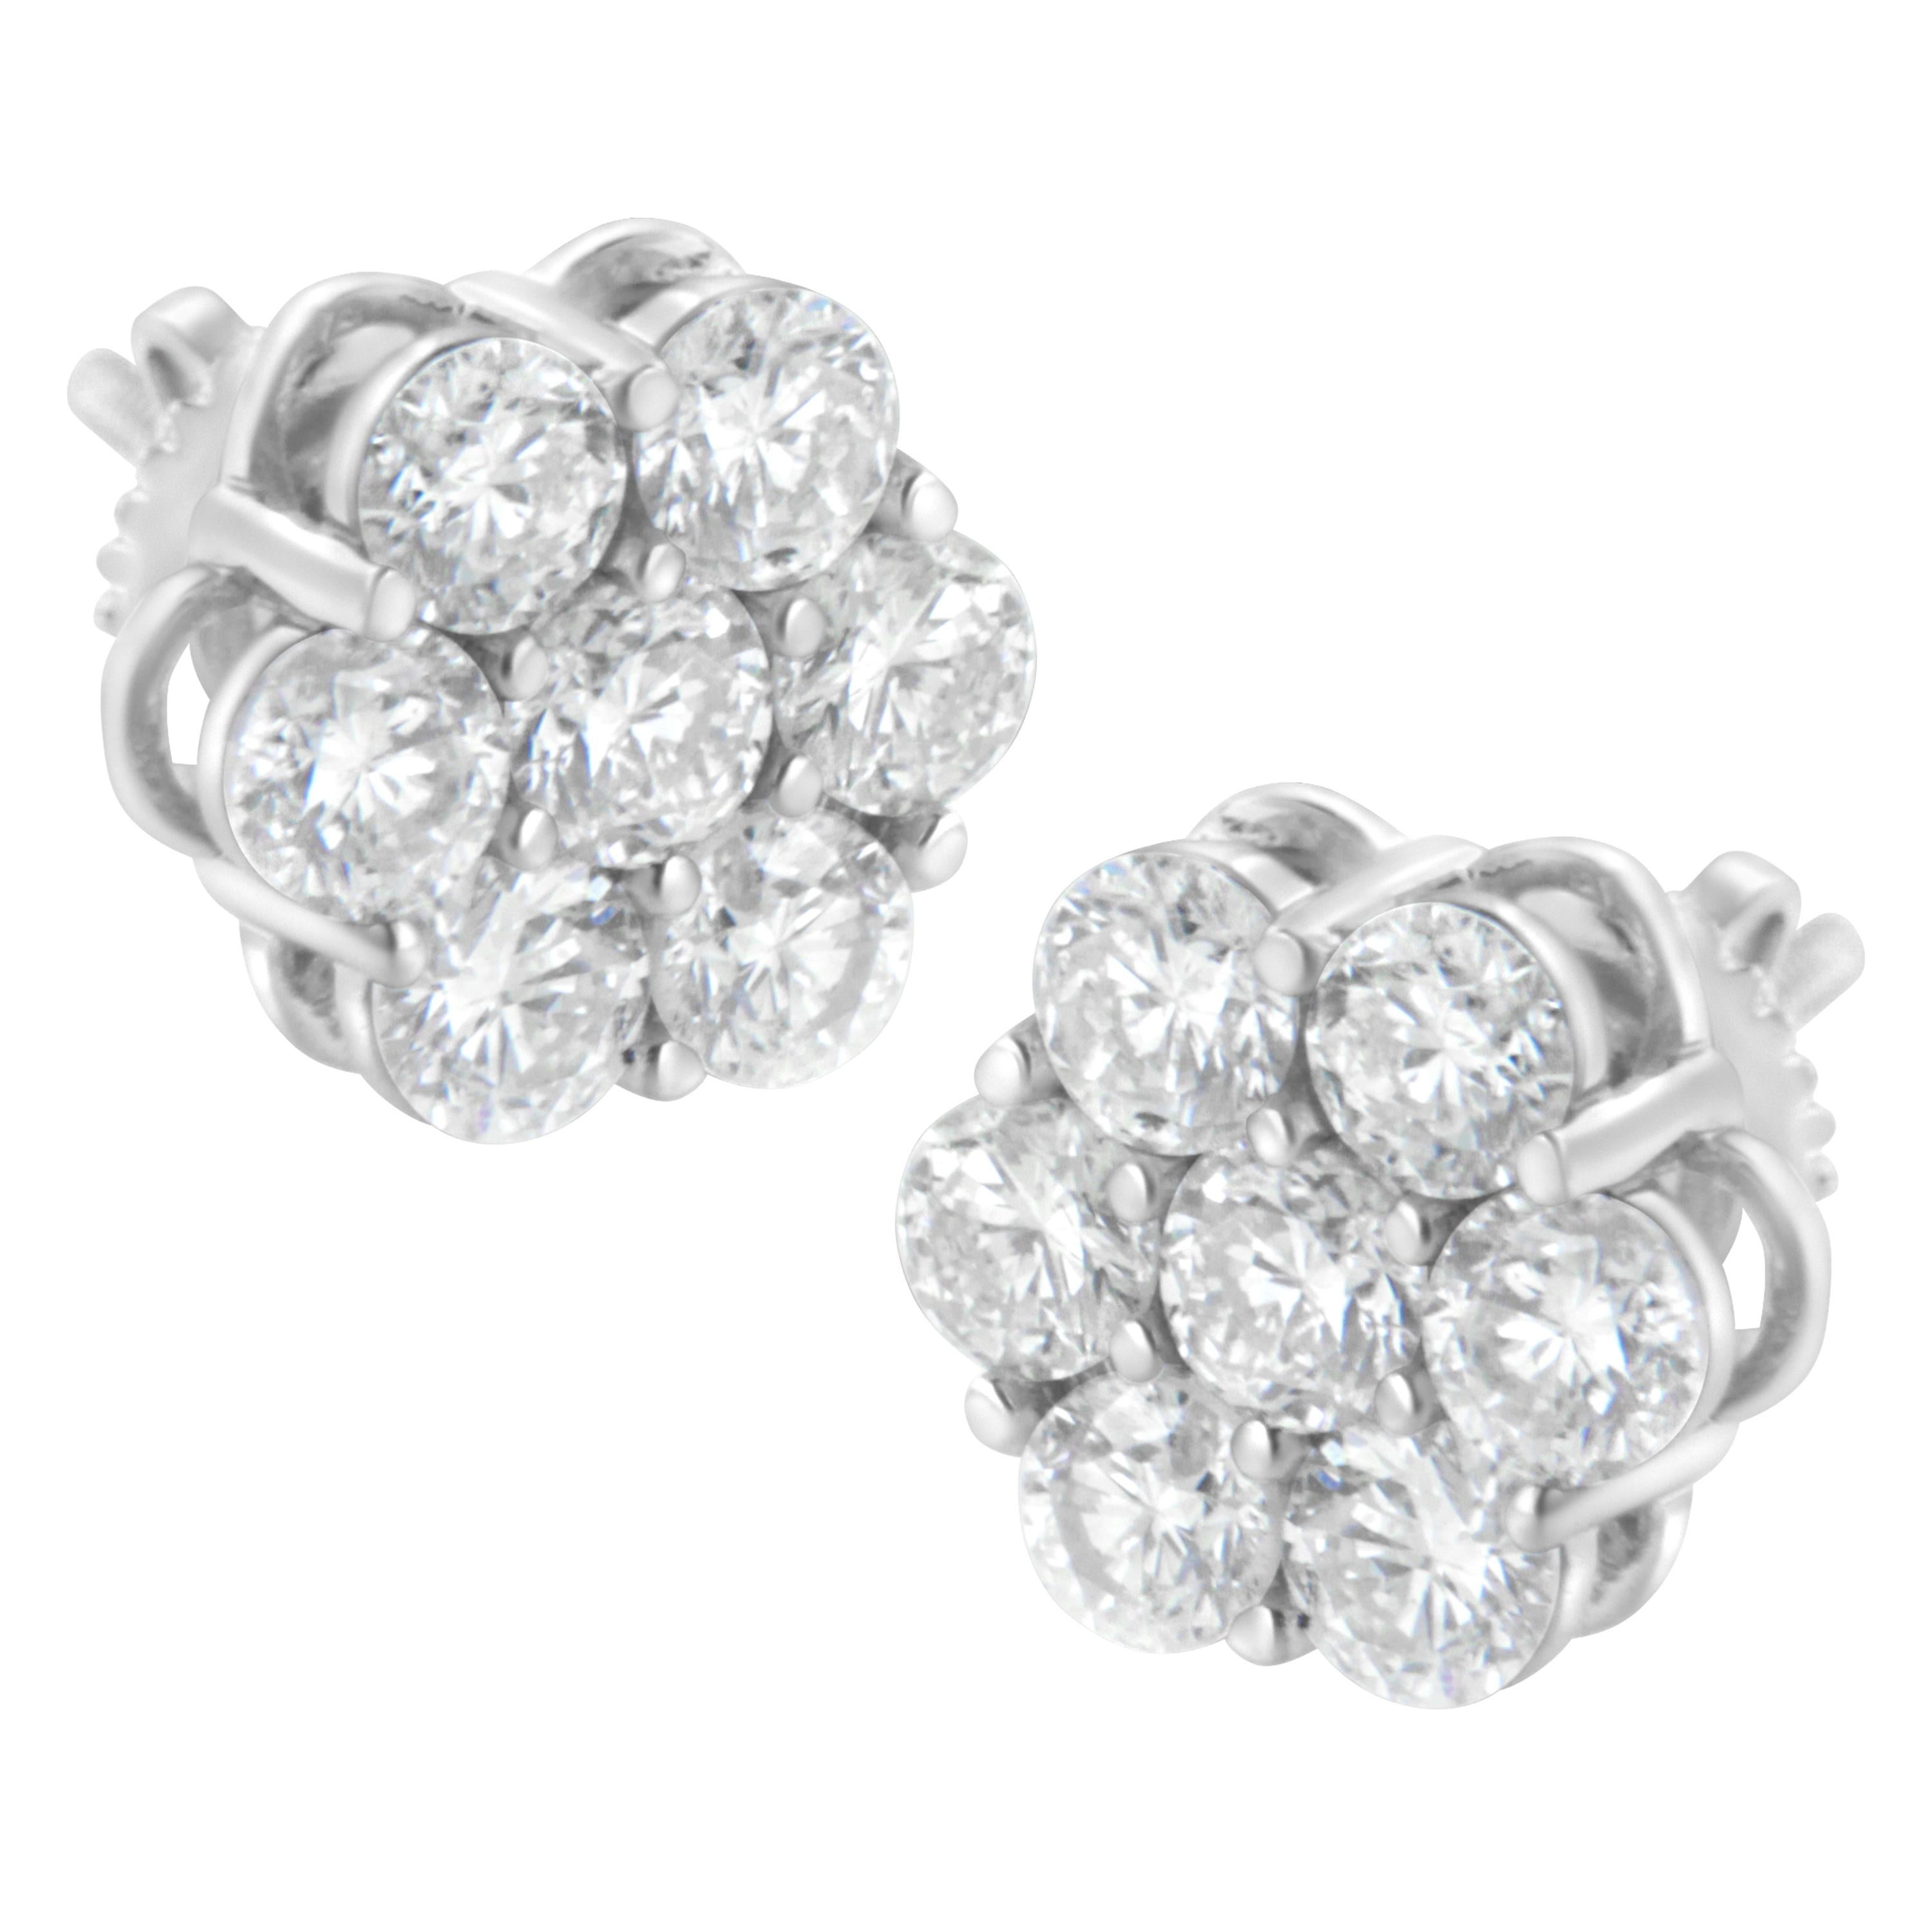 .925 Sterling Silver 2.0 Carat Floral Composite 7 Stone Diamond Stud Earring For Sale